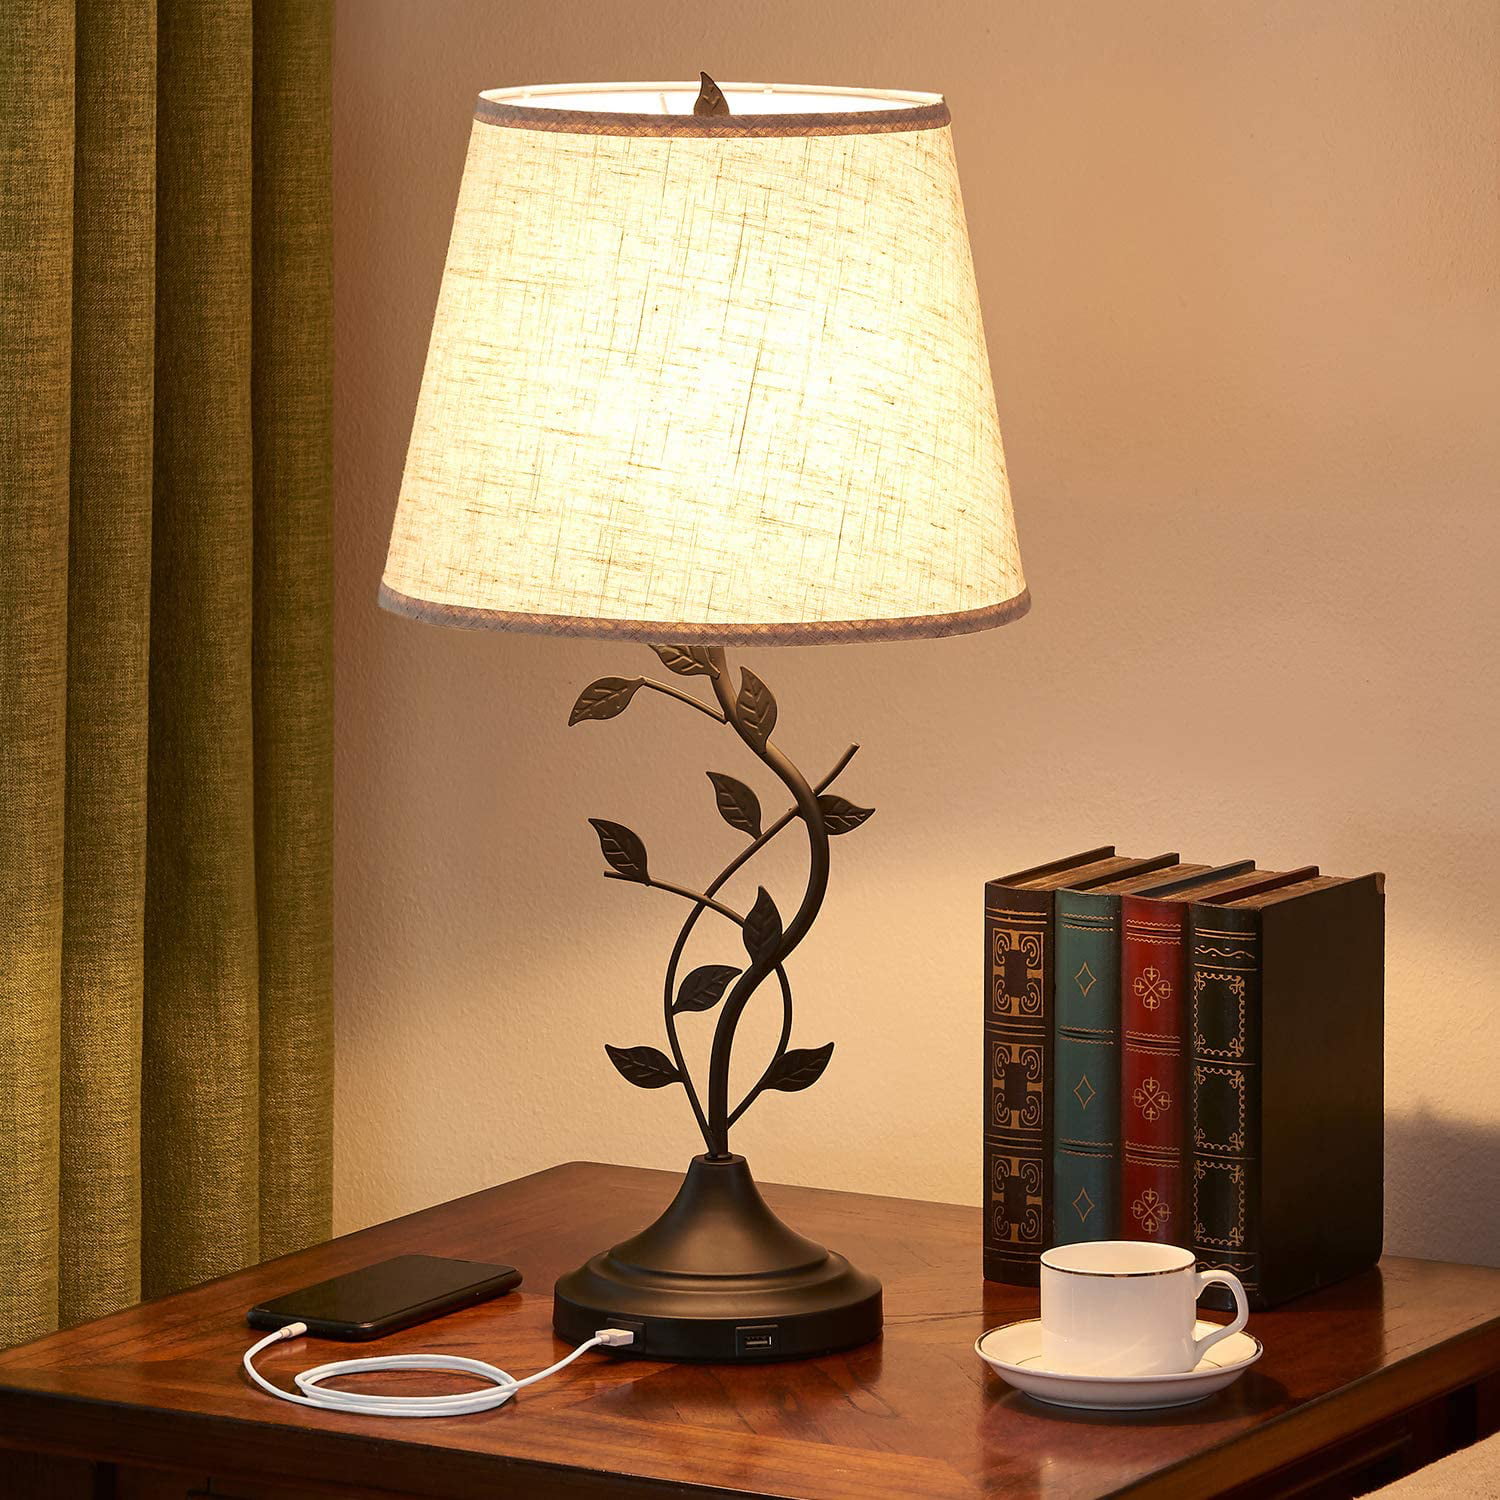 Bedside Table Lamps With Usb Charger - Amazon.com: Bedside Table Lamp